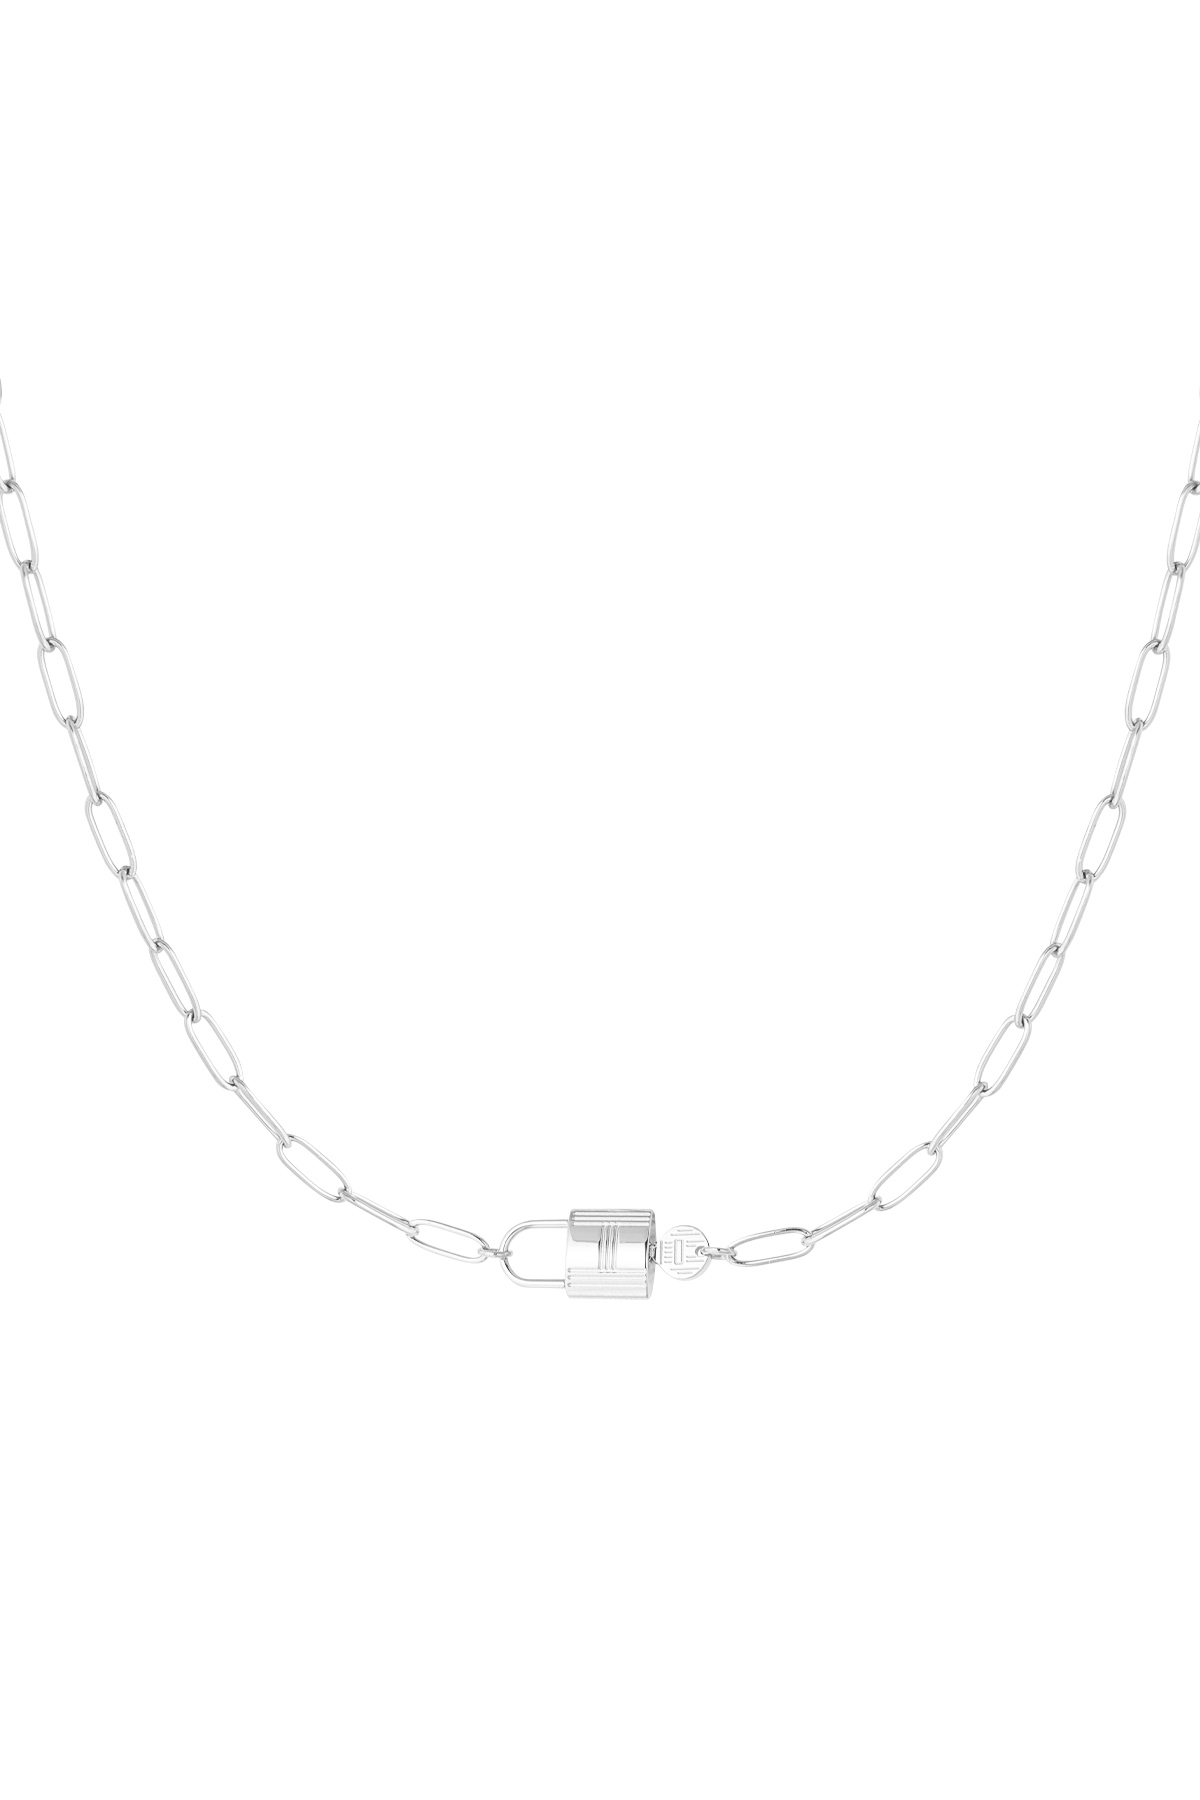 Chain link with lock - silver